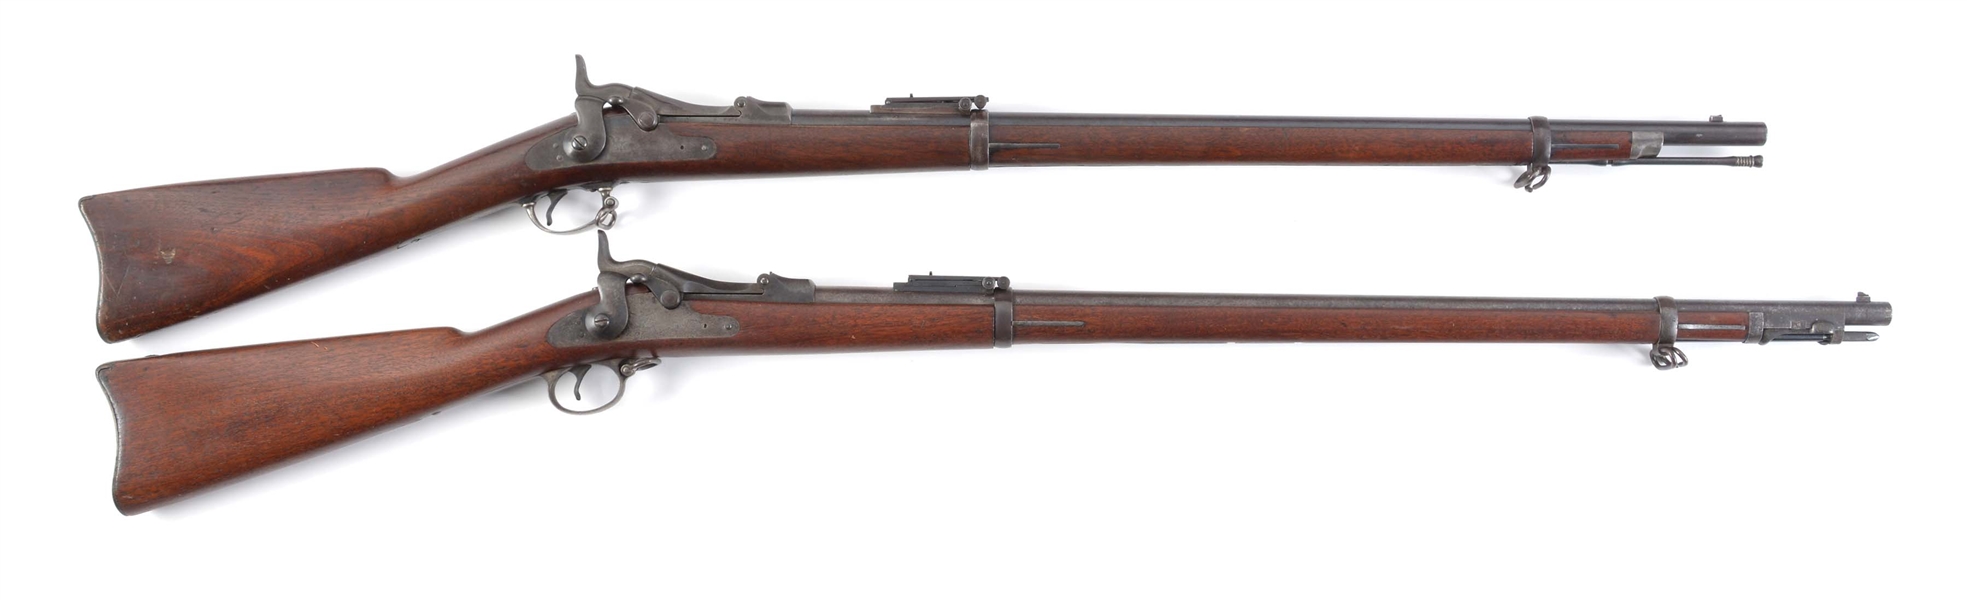 (A) LOT OF TWO: SPRINGFIELD 1884 CADET TRAPDOOR AND 1888 TRAPDOOR RIFLES.